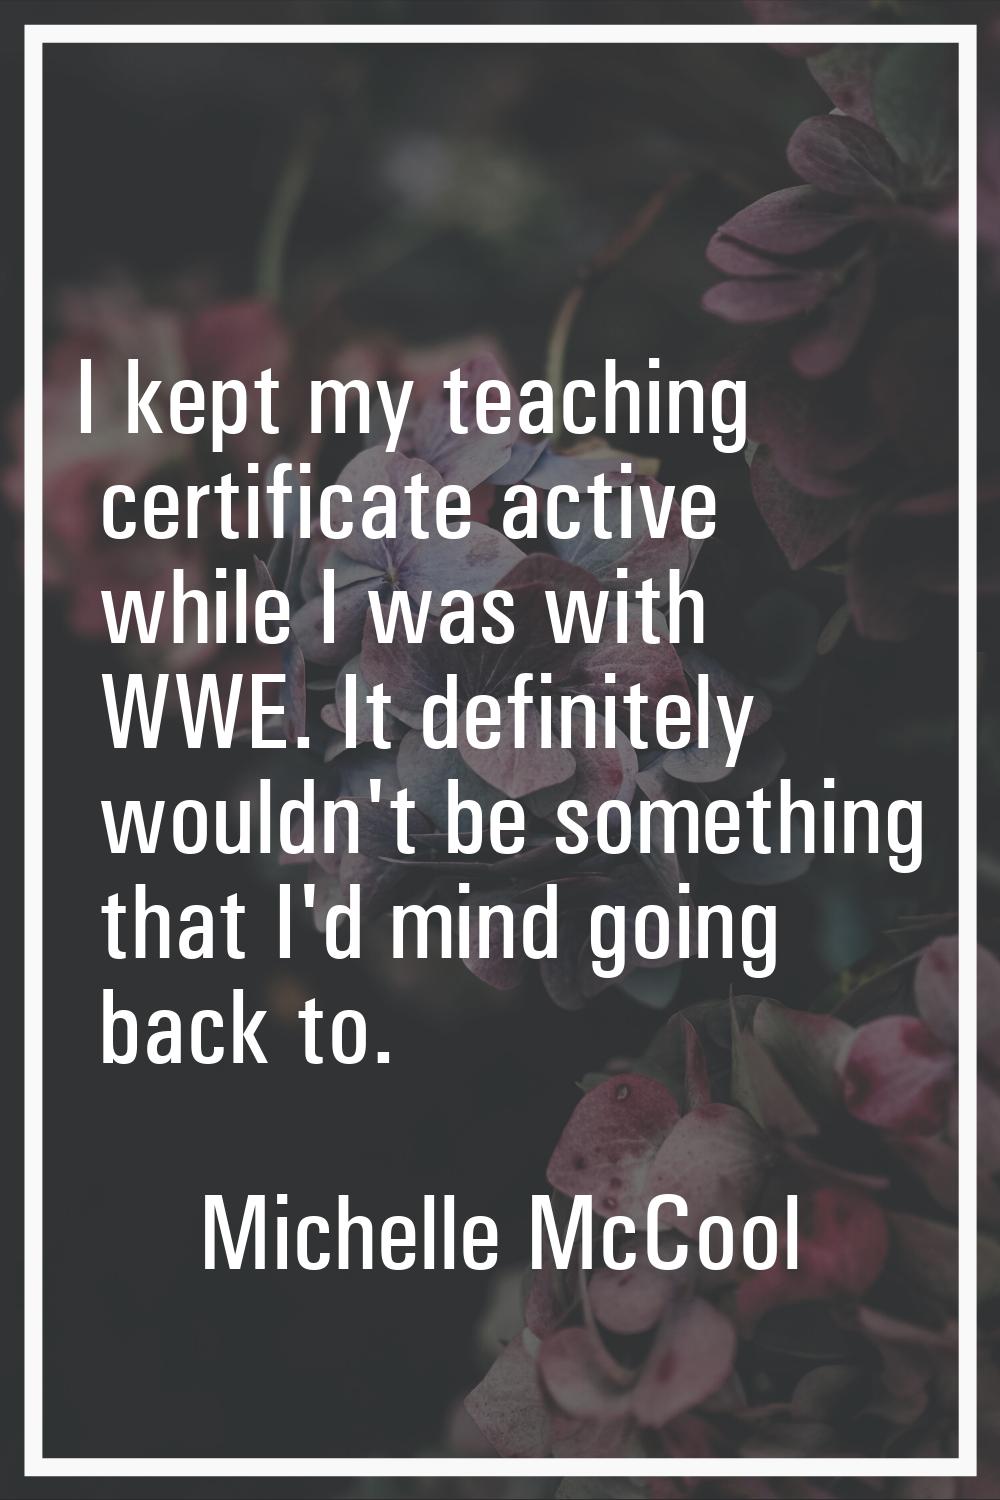 I kept my teaching certificate active while I was with WWE. It definitely wouldn't be something tha